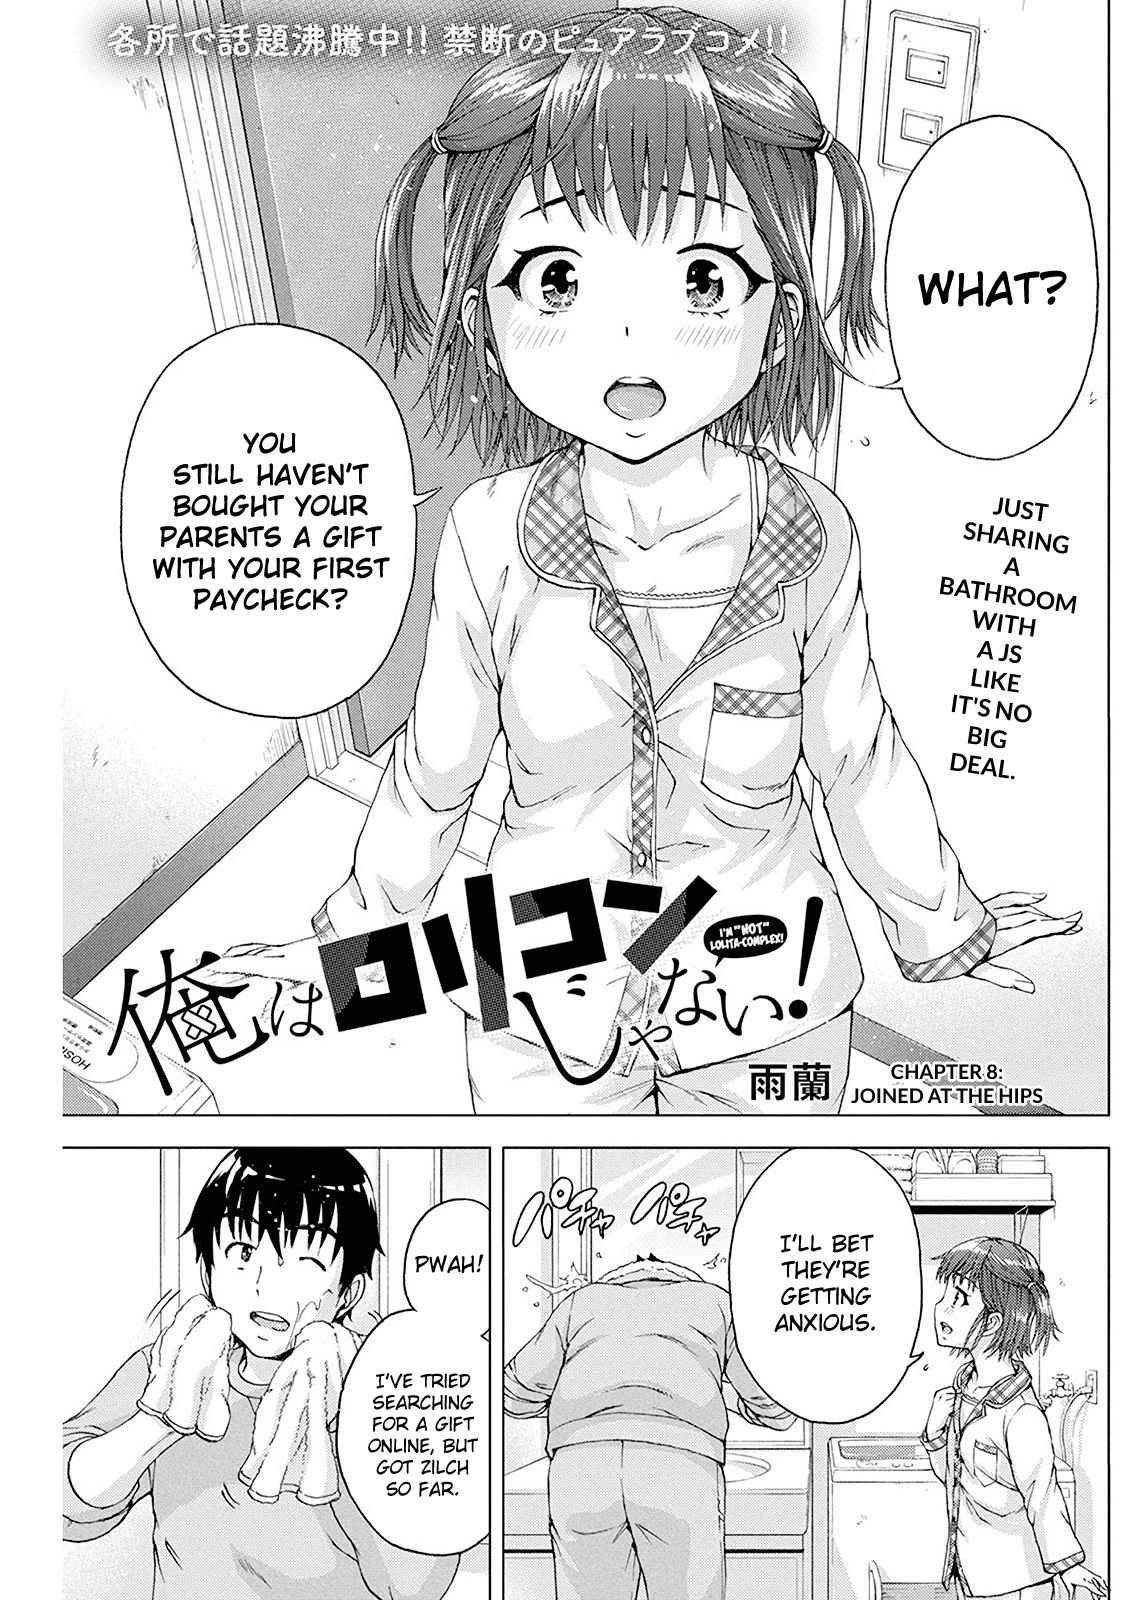 I'm Not a Lolicon! Vol. 2 Ch. 8 Joined at the Hips